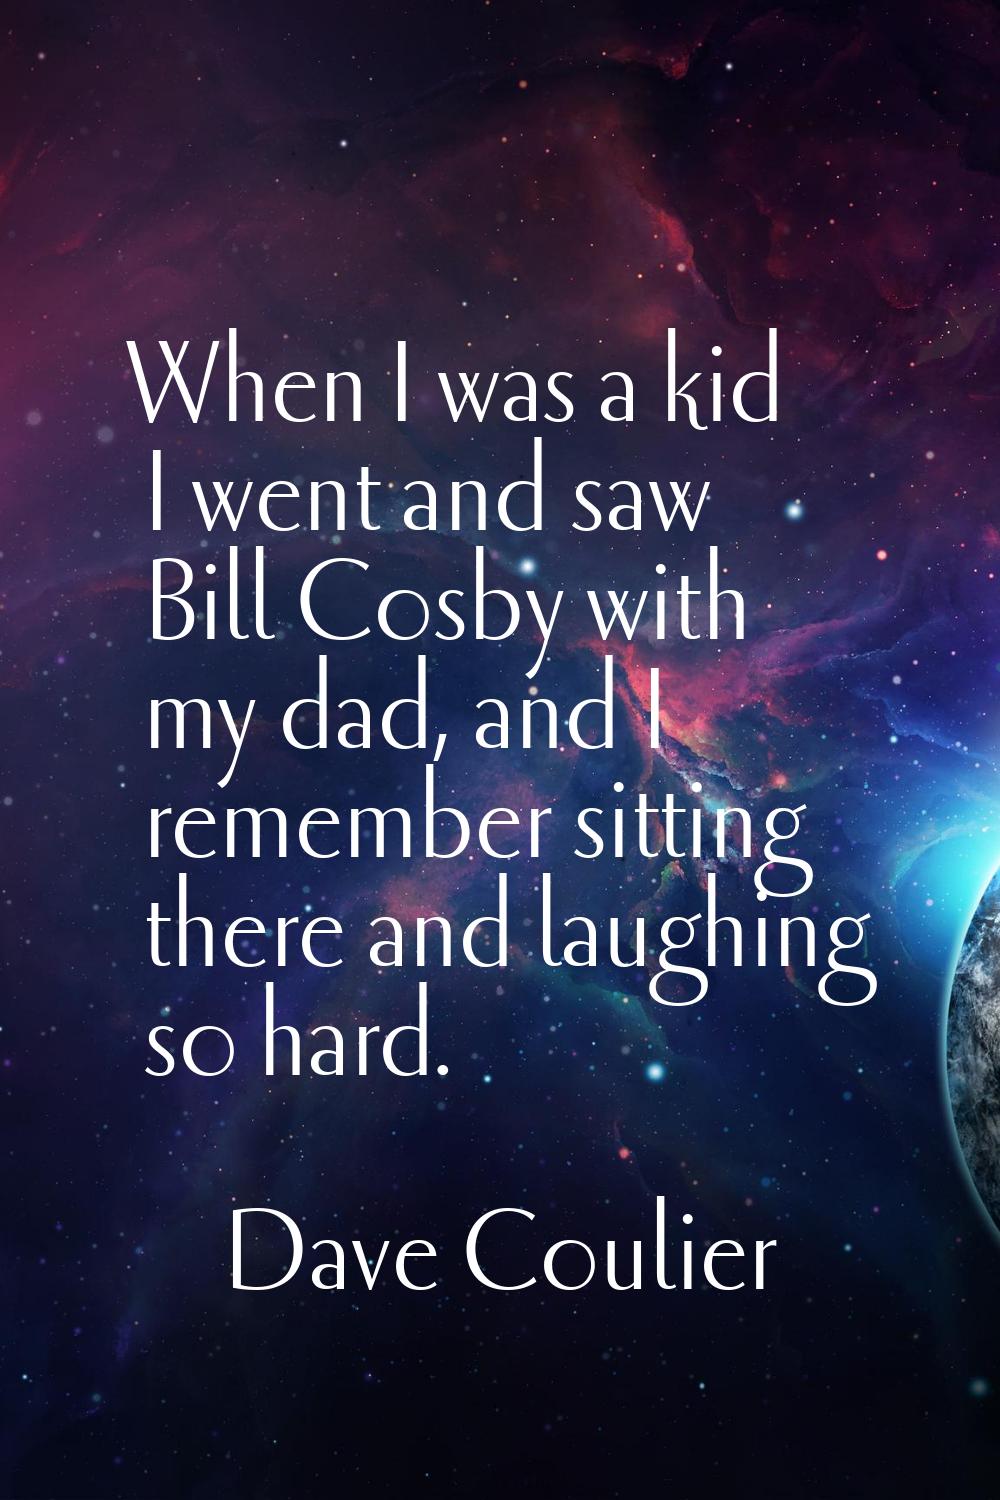 When I was a kid I went and saw Bill Cosby with my dad, and I remember sitting there and laughing s